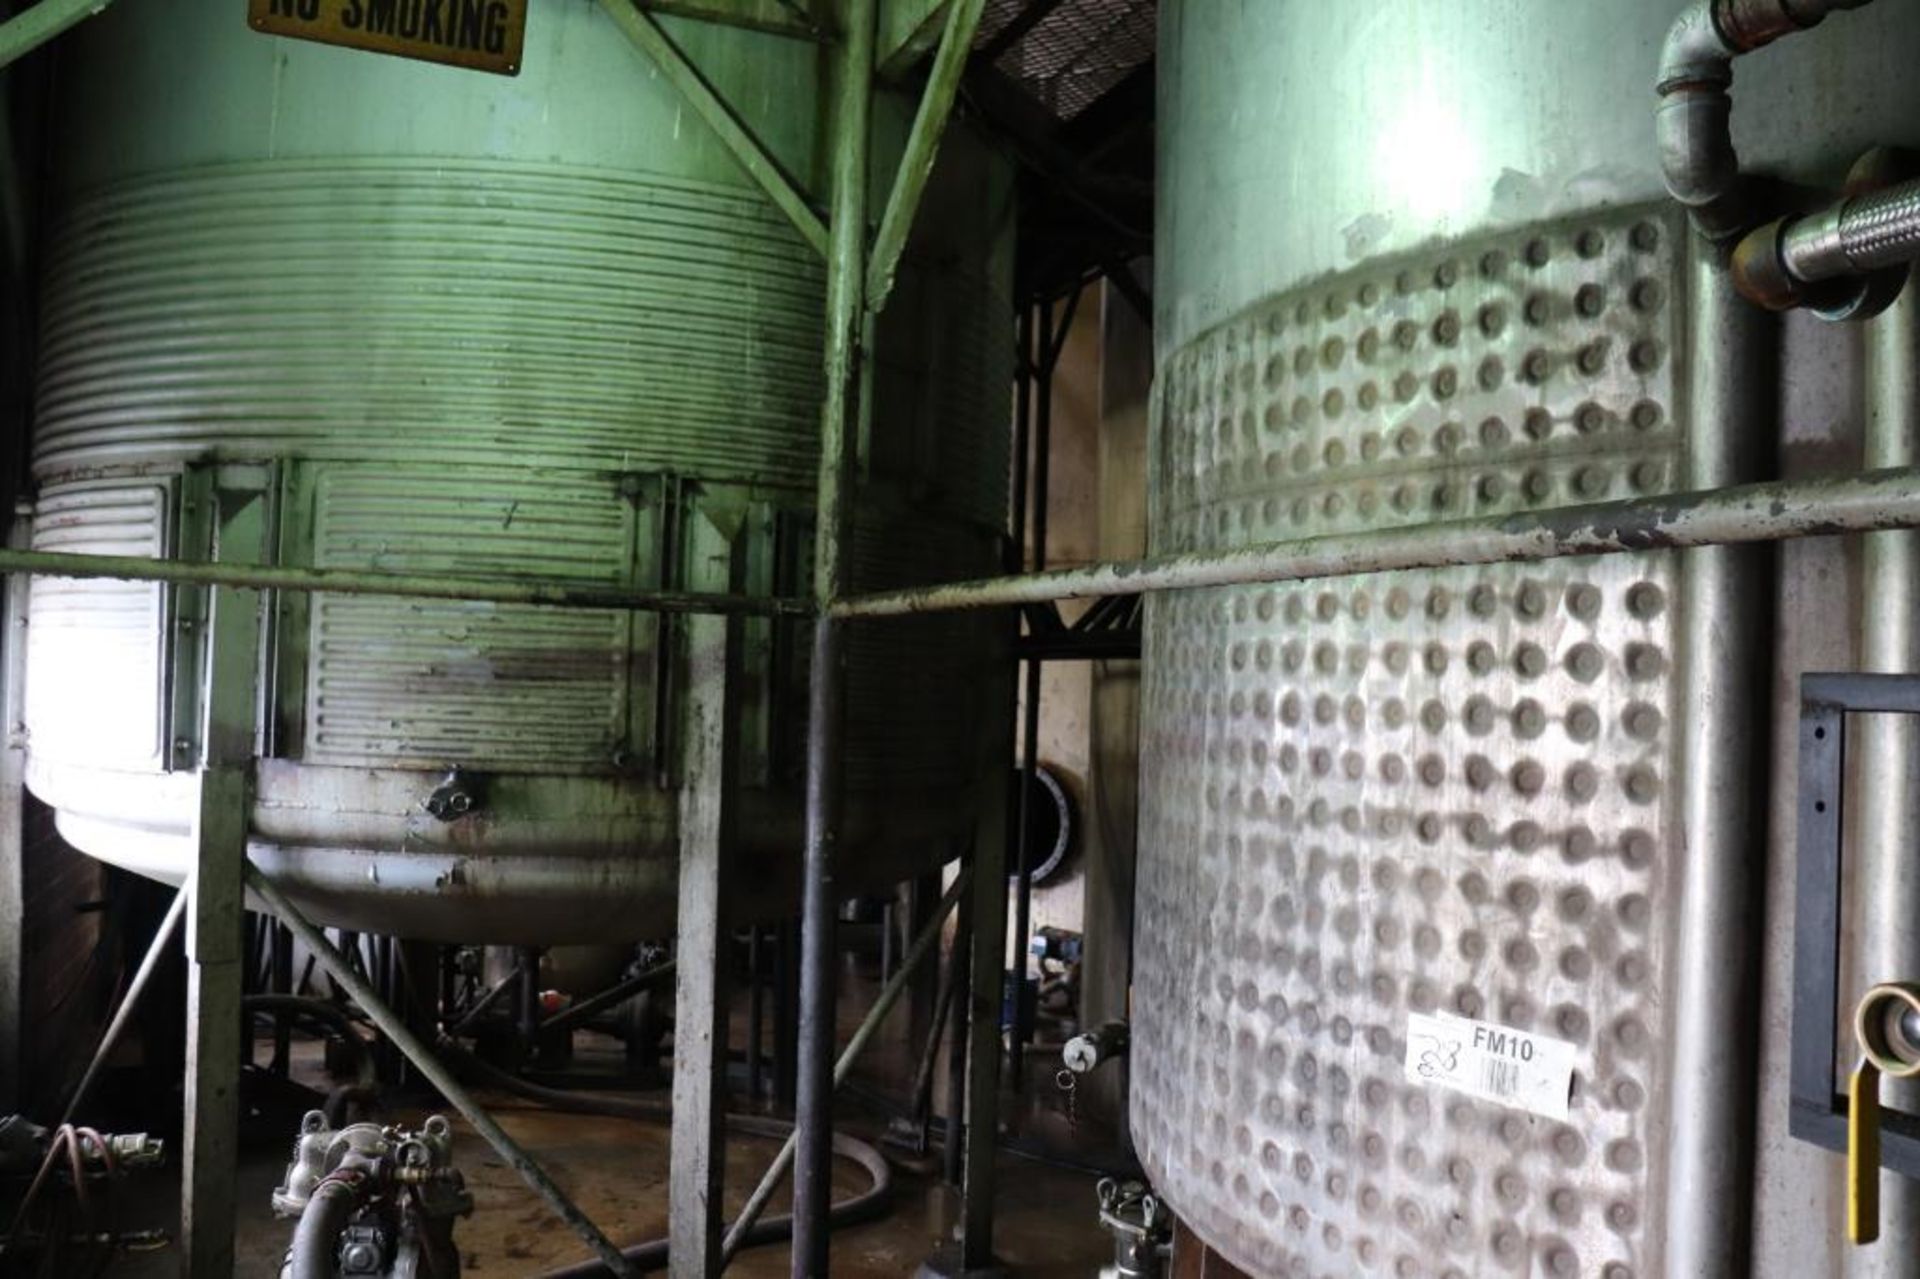 Stainless steel & steel mixing tanks, Contents of room - Image 4 of 13